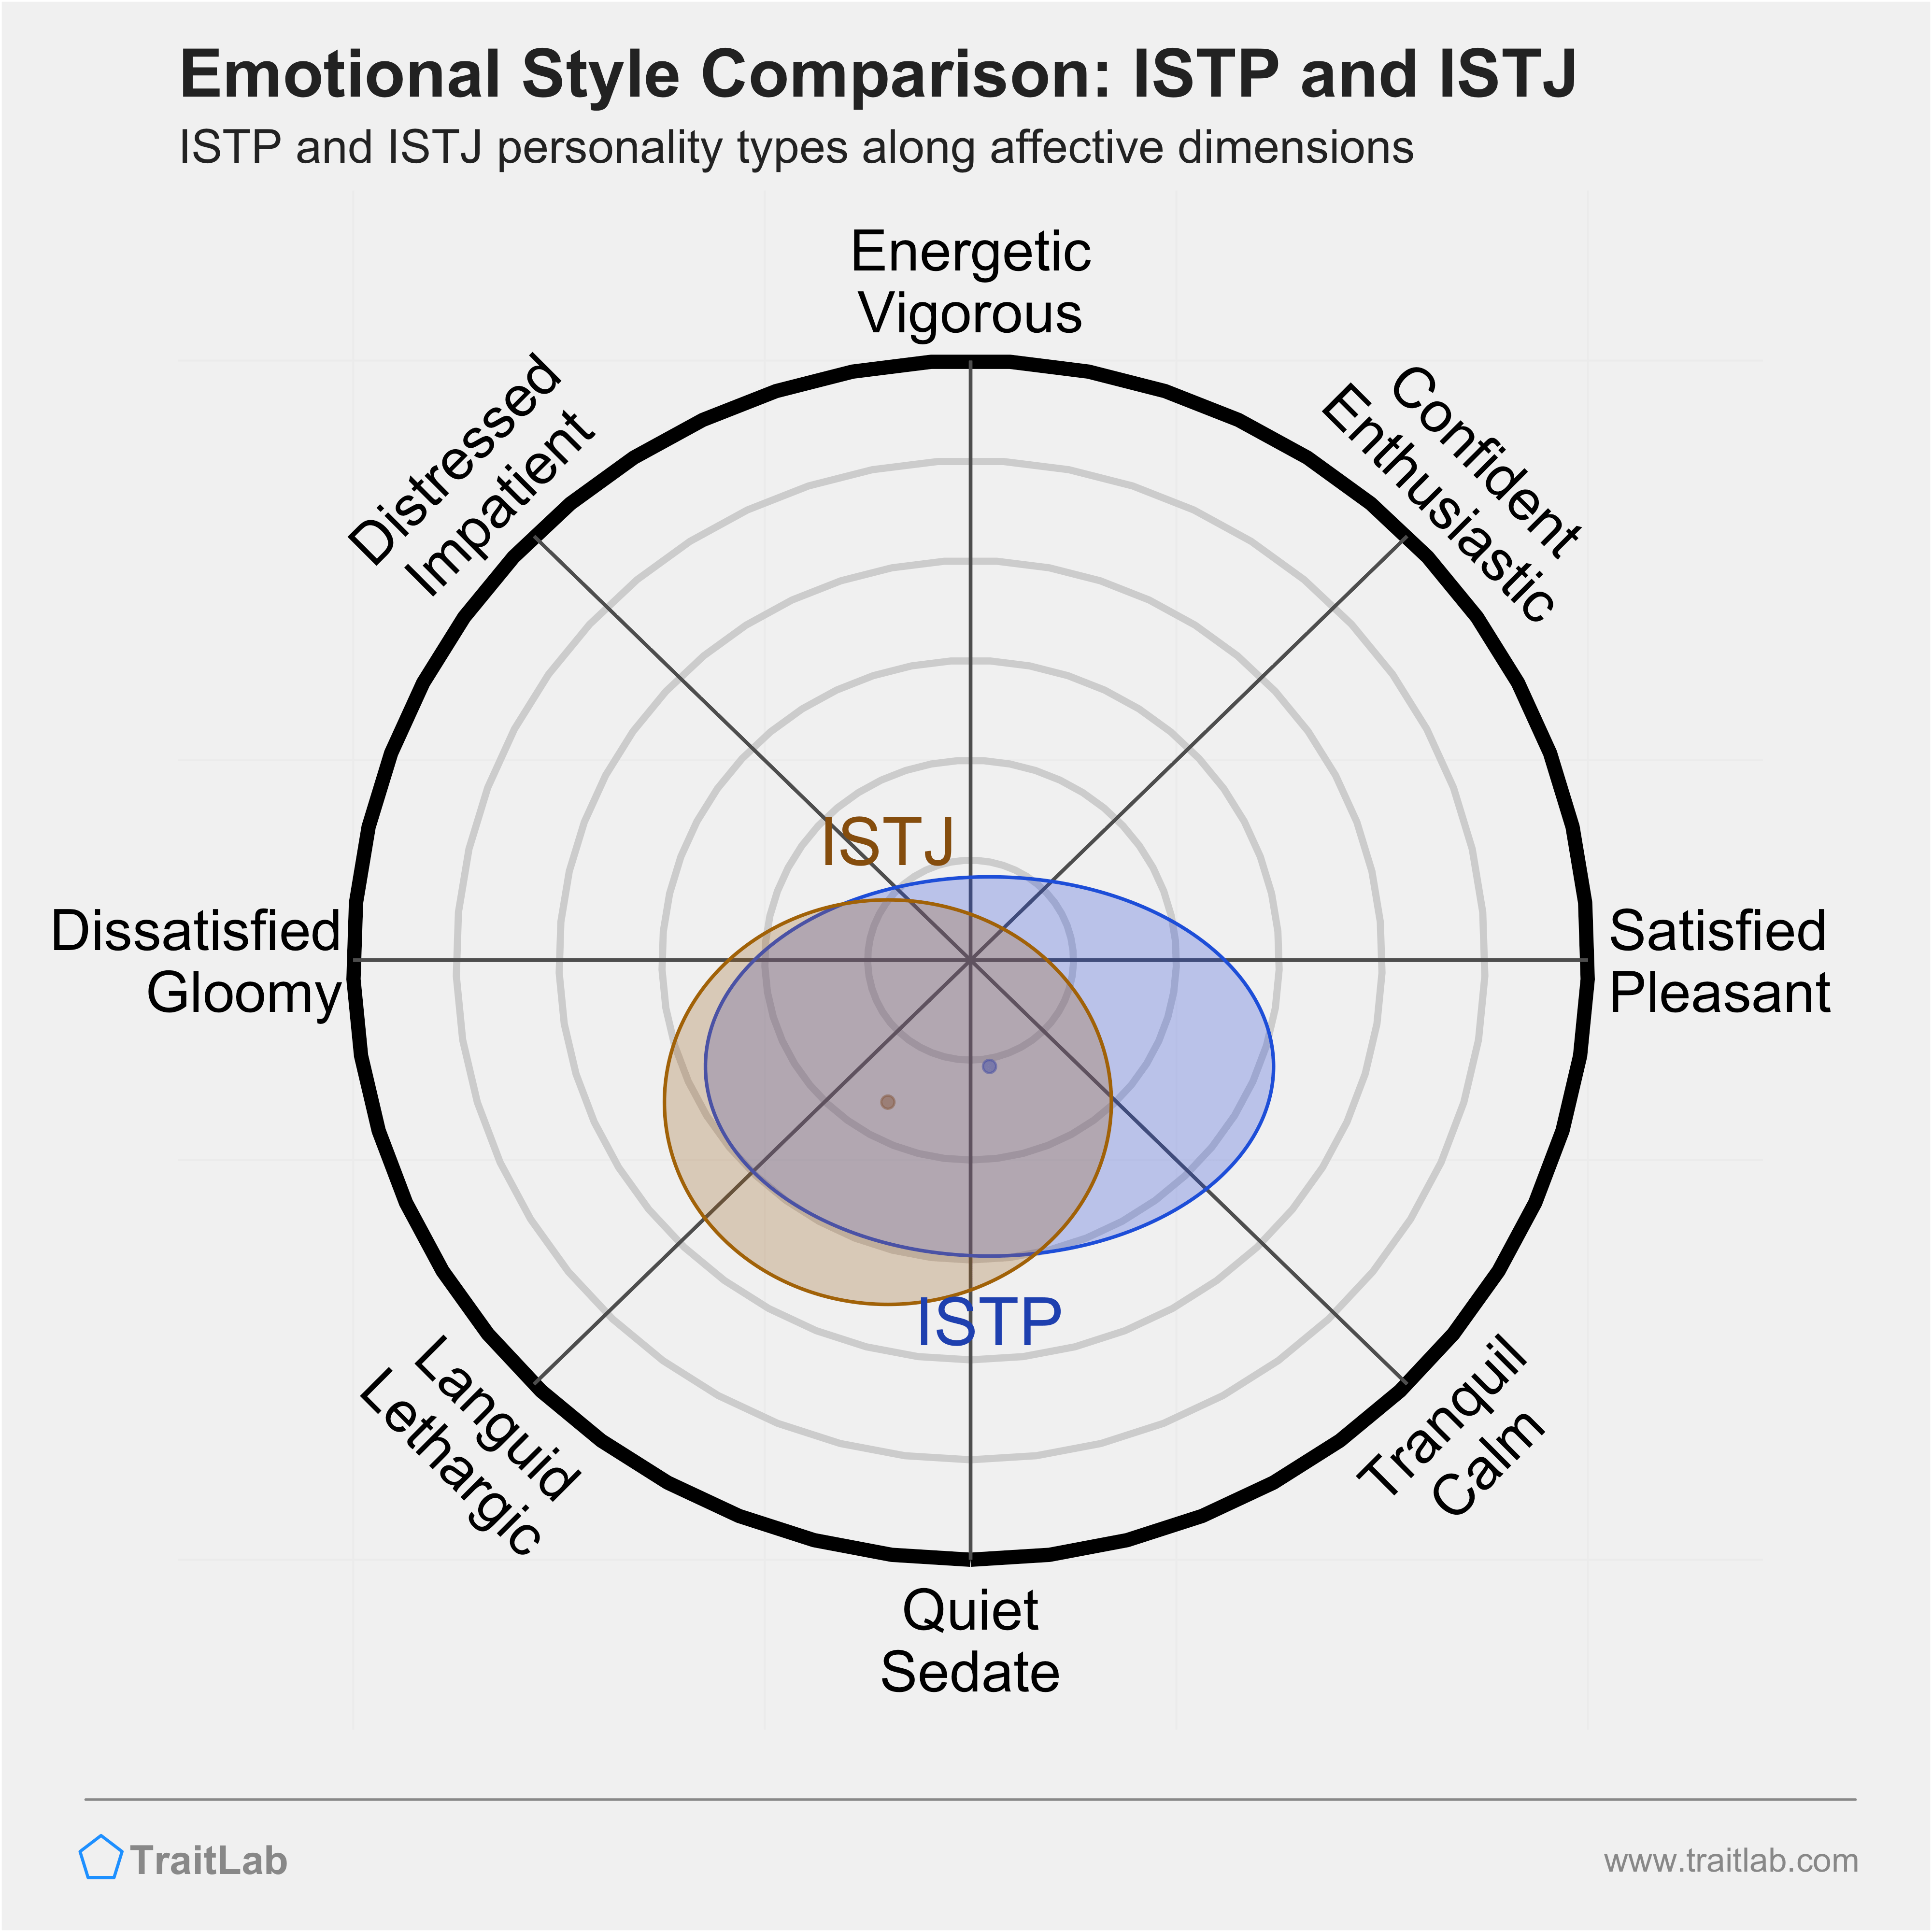 ISTP and ISTJ comparison across emotional (affective) dimensions